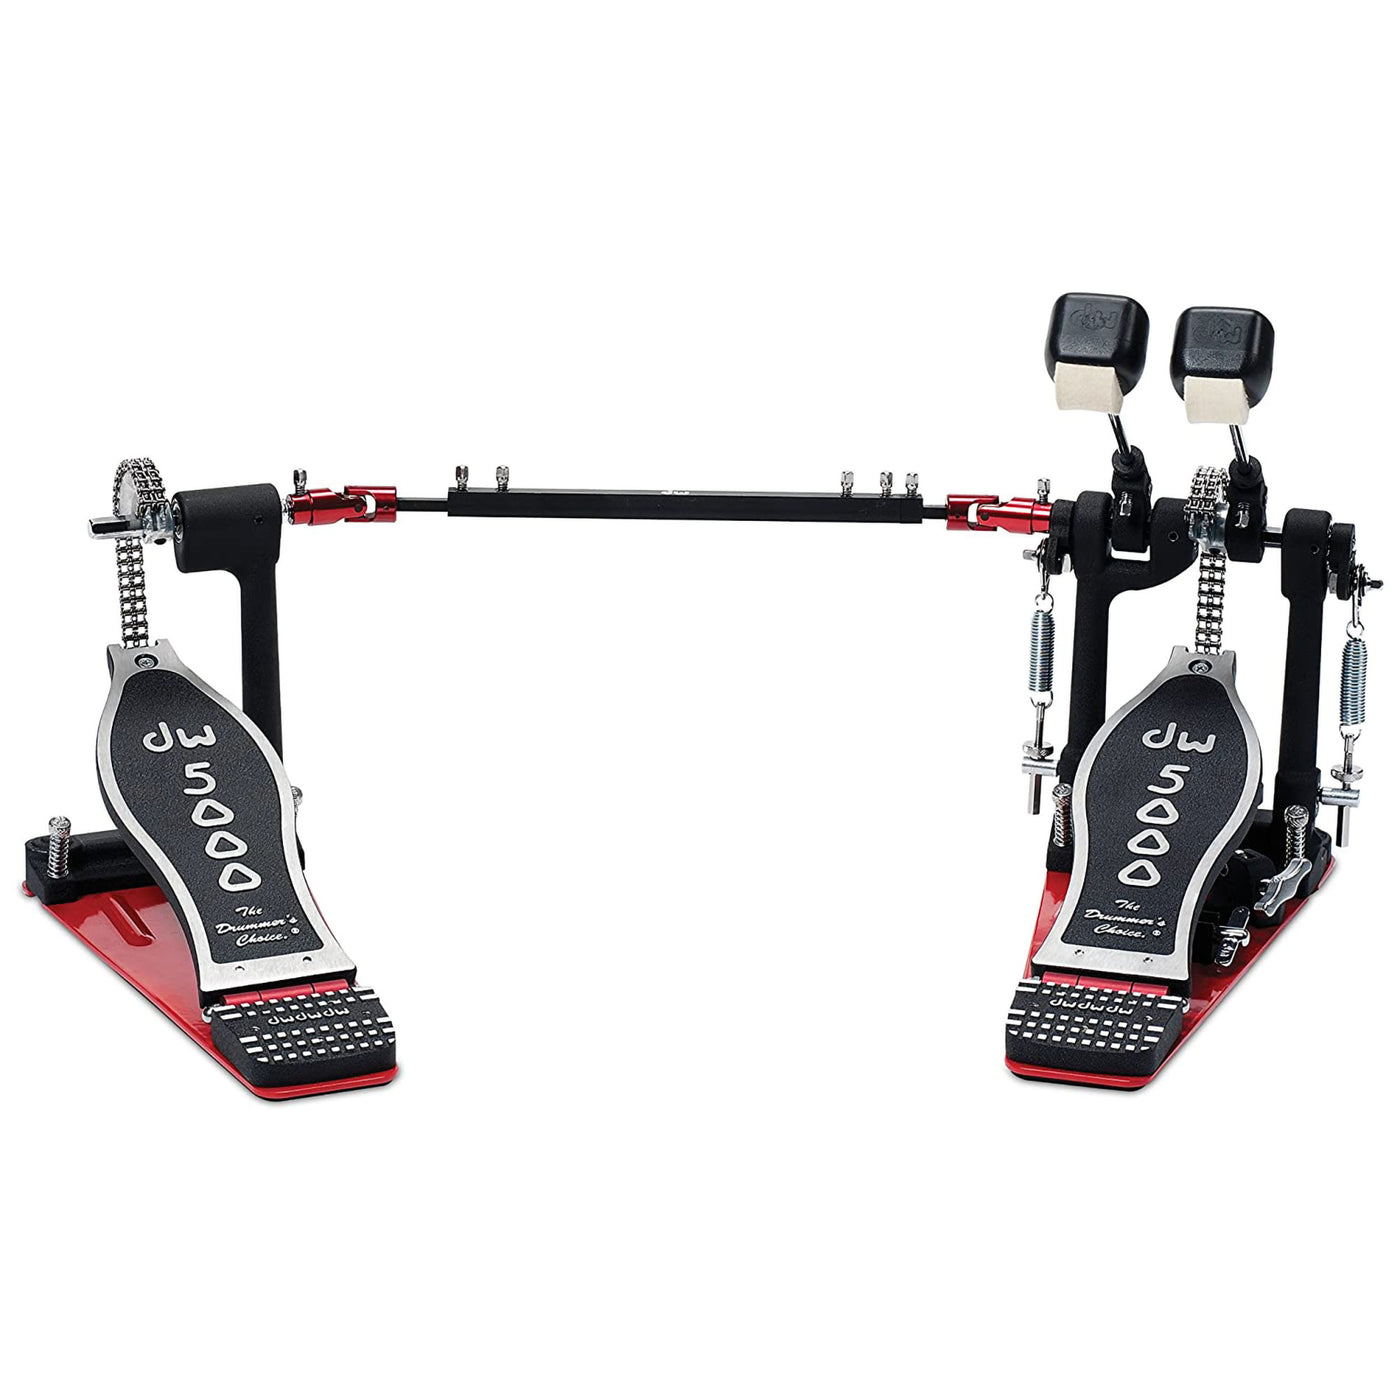 DW 5002 Series Delta III Accelerator Double Bass Drum Pedal